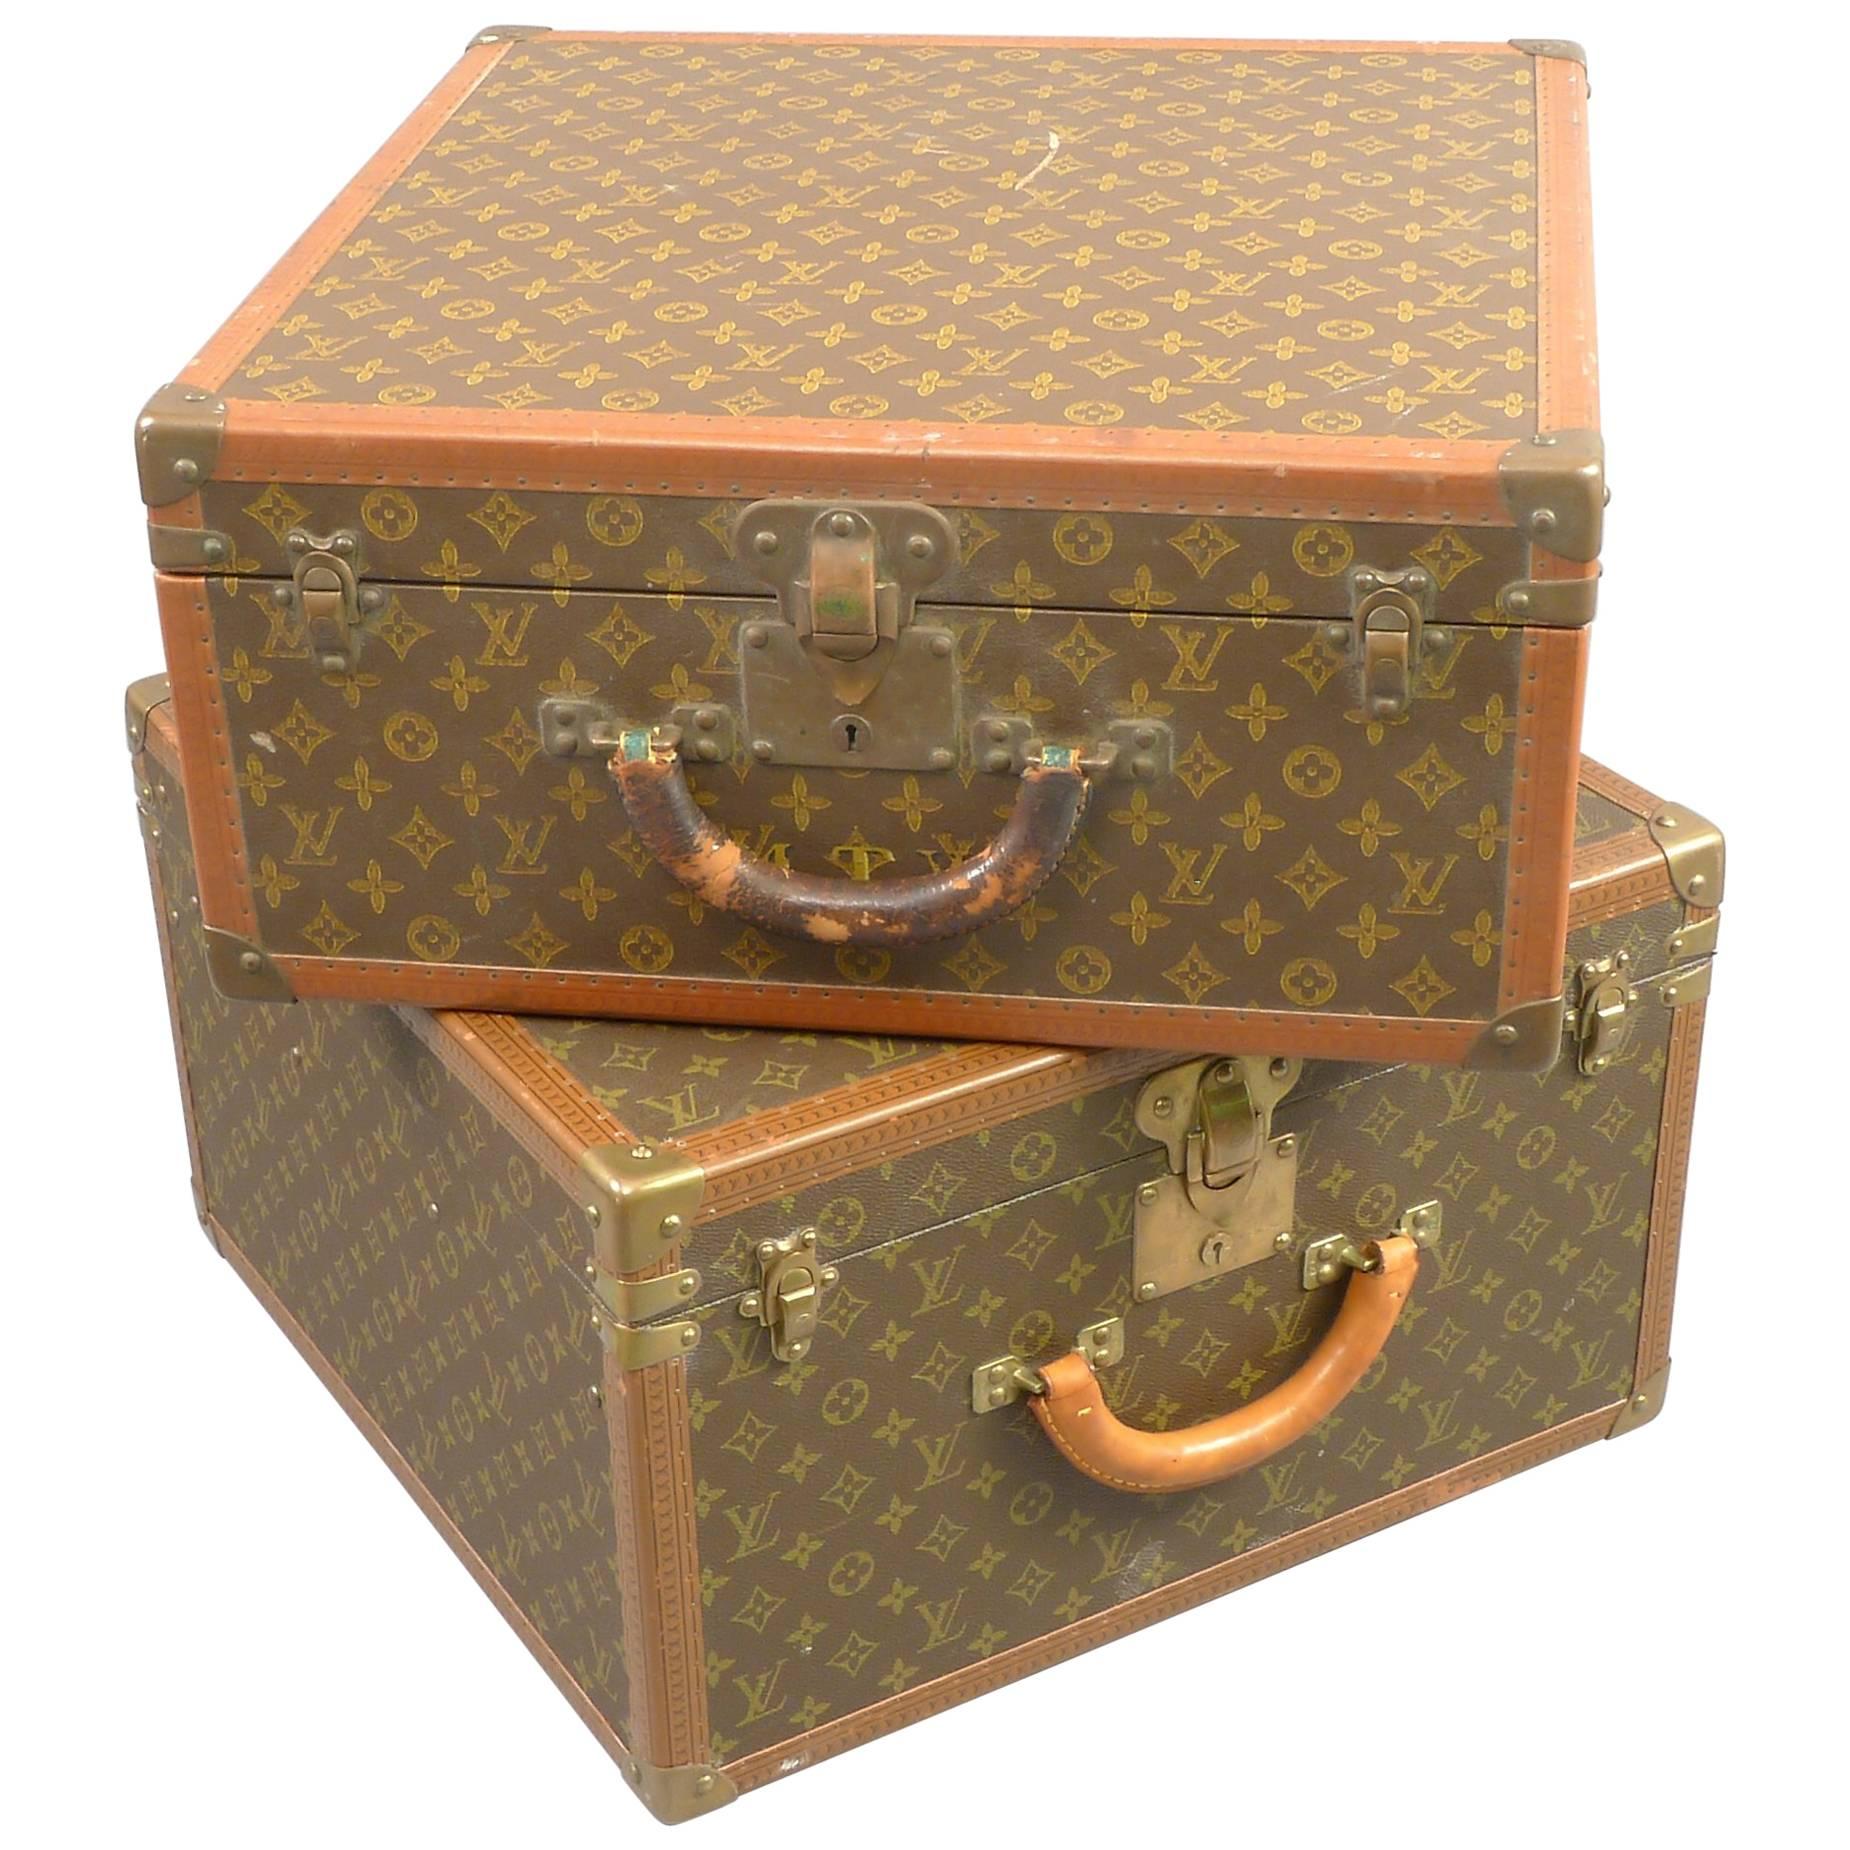 Unmatched Pair of Vintage Louis Vuitton Suitcases, Leather and Brass